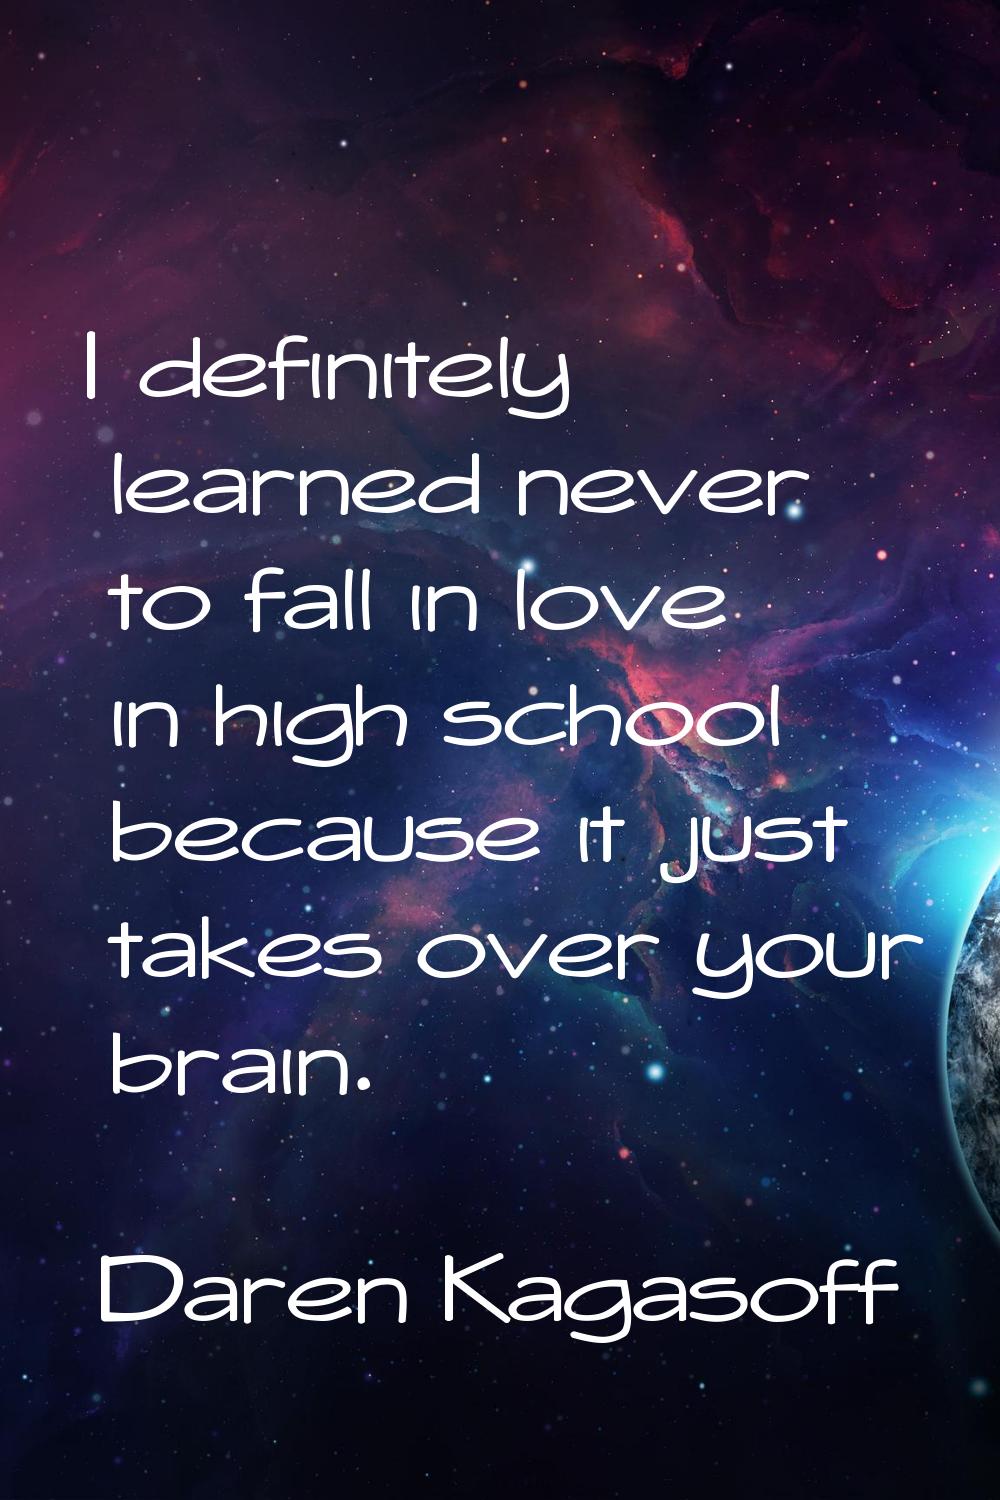 I definitely learned never to fall in love in high school because it just takes over your brain.